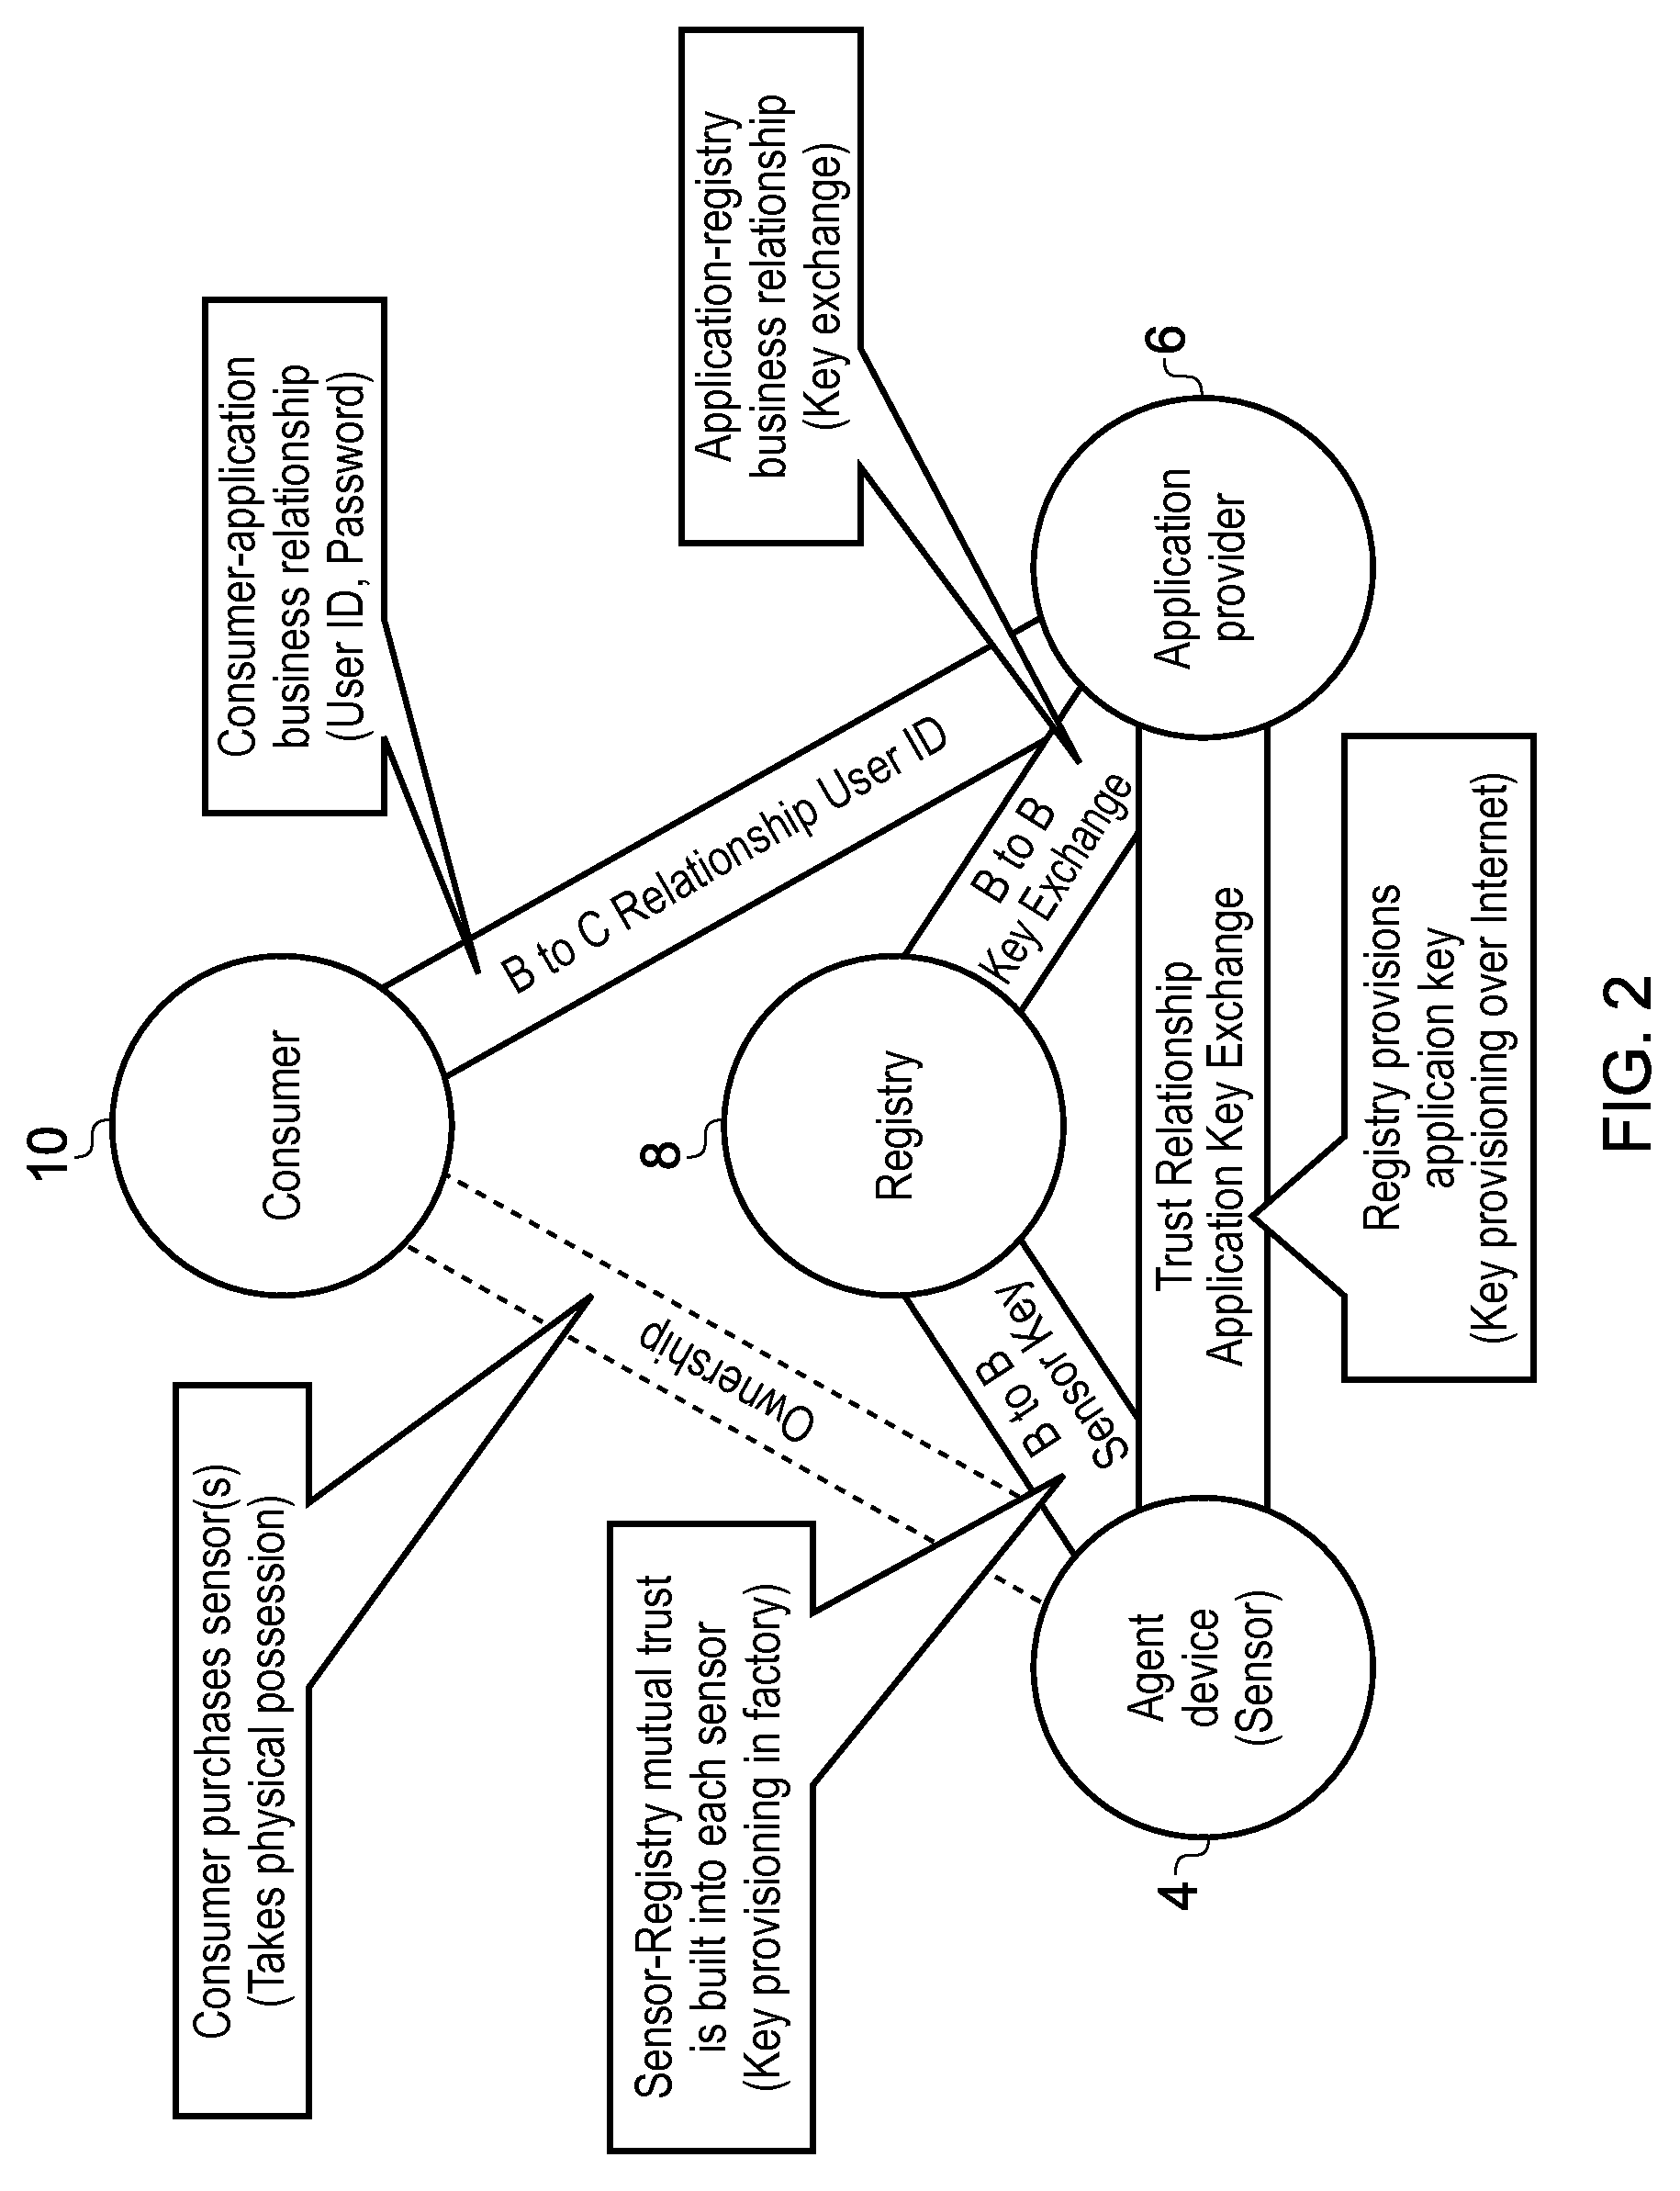 Method for assigning an agent device from a first device registry to a second device registry